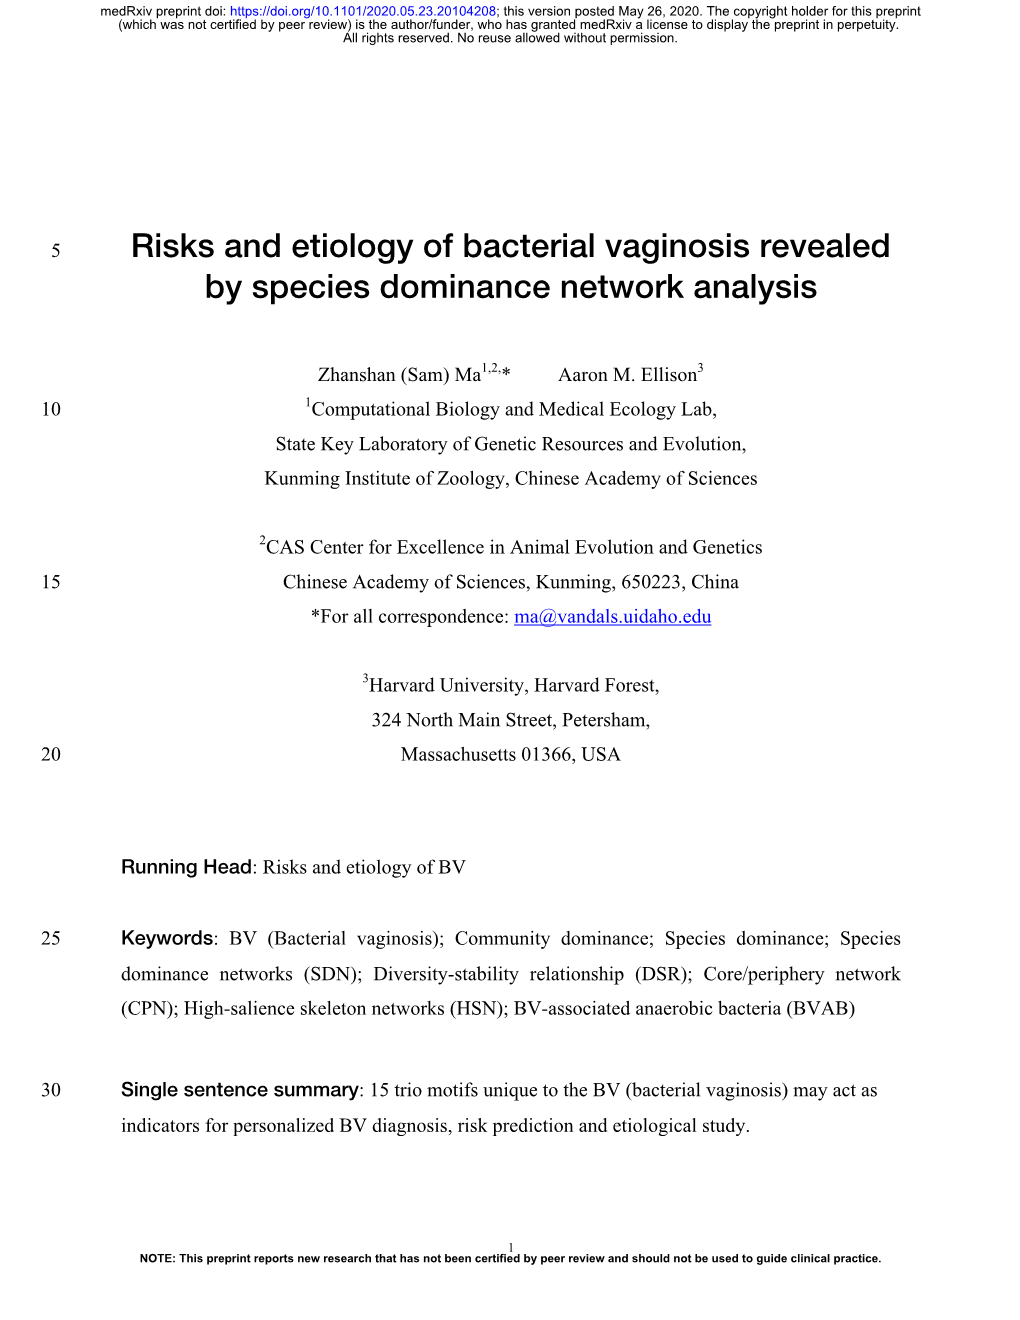 Risks and Etiology of Bacterial Vaginosis Revealed by Species Dominance Network Analysis